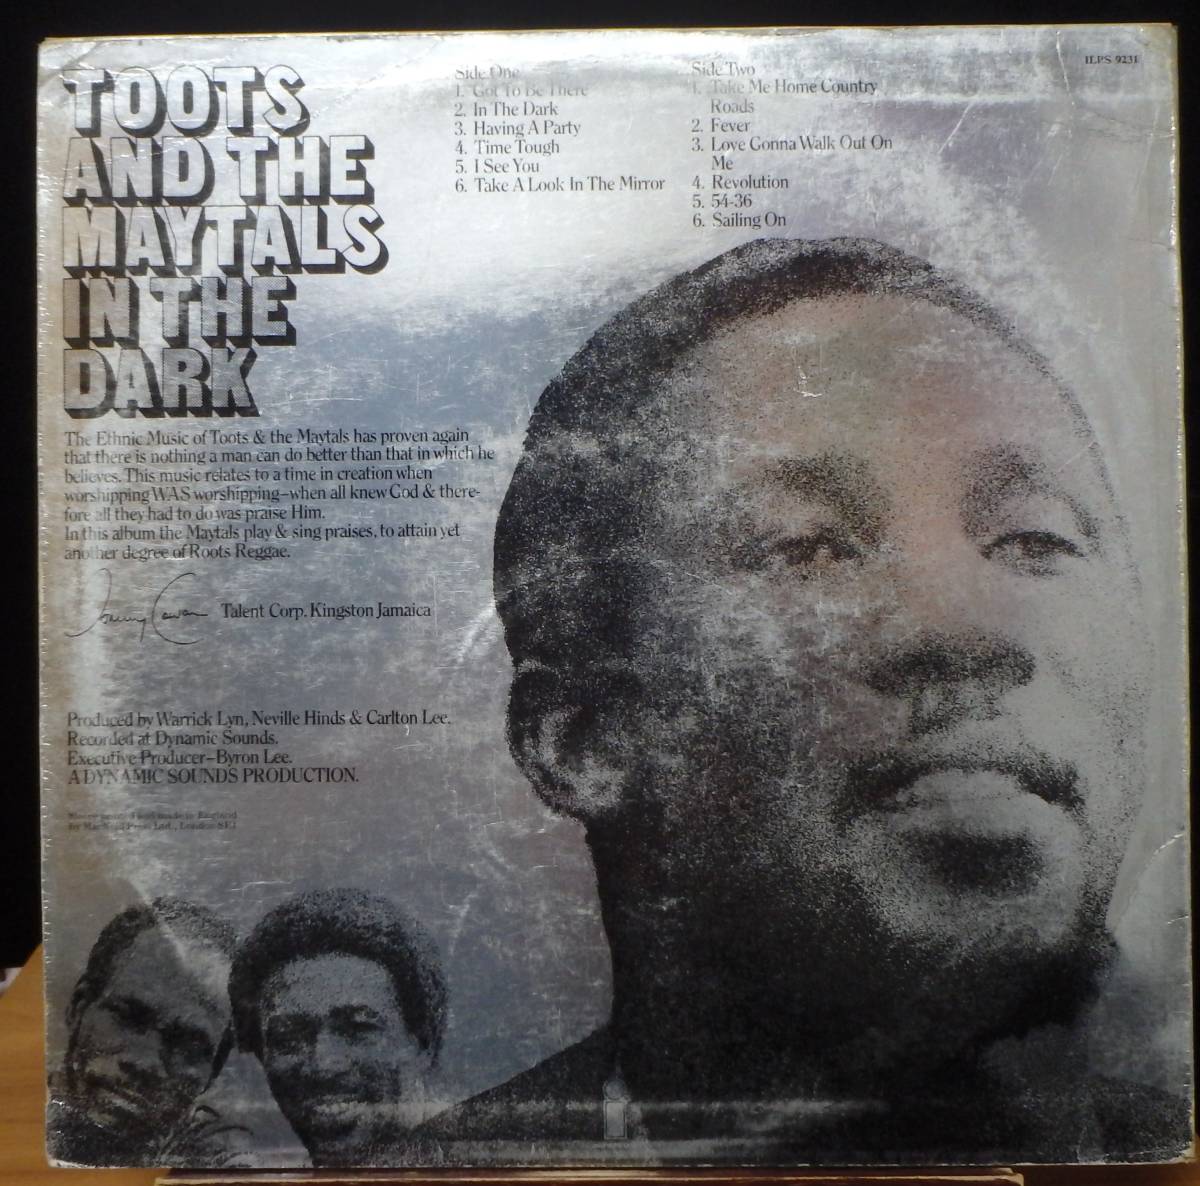 【RG037】TOOTS & THE MAYTALS 「In The Dark」, 76 UK Reissue　★ルーツ・レゲエ/レゲエ_画像2